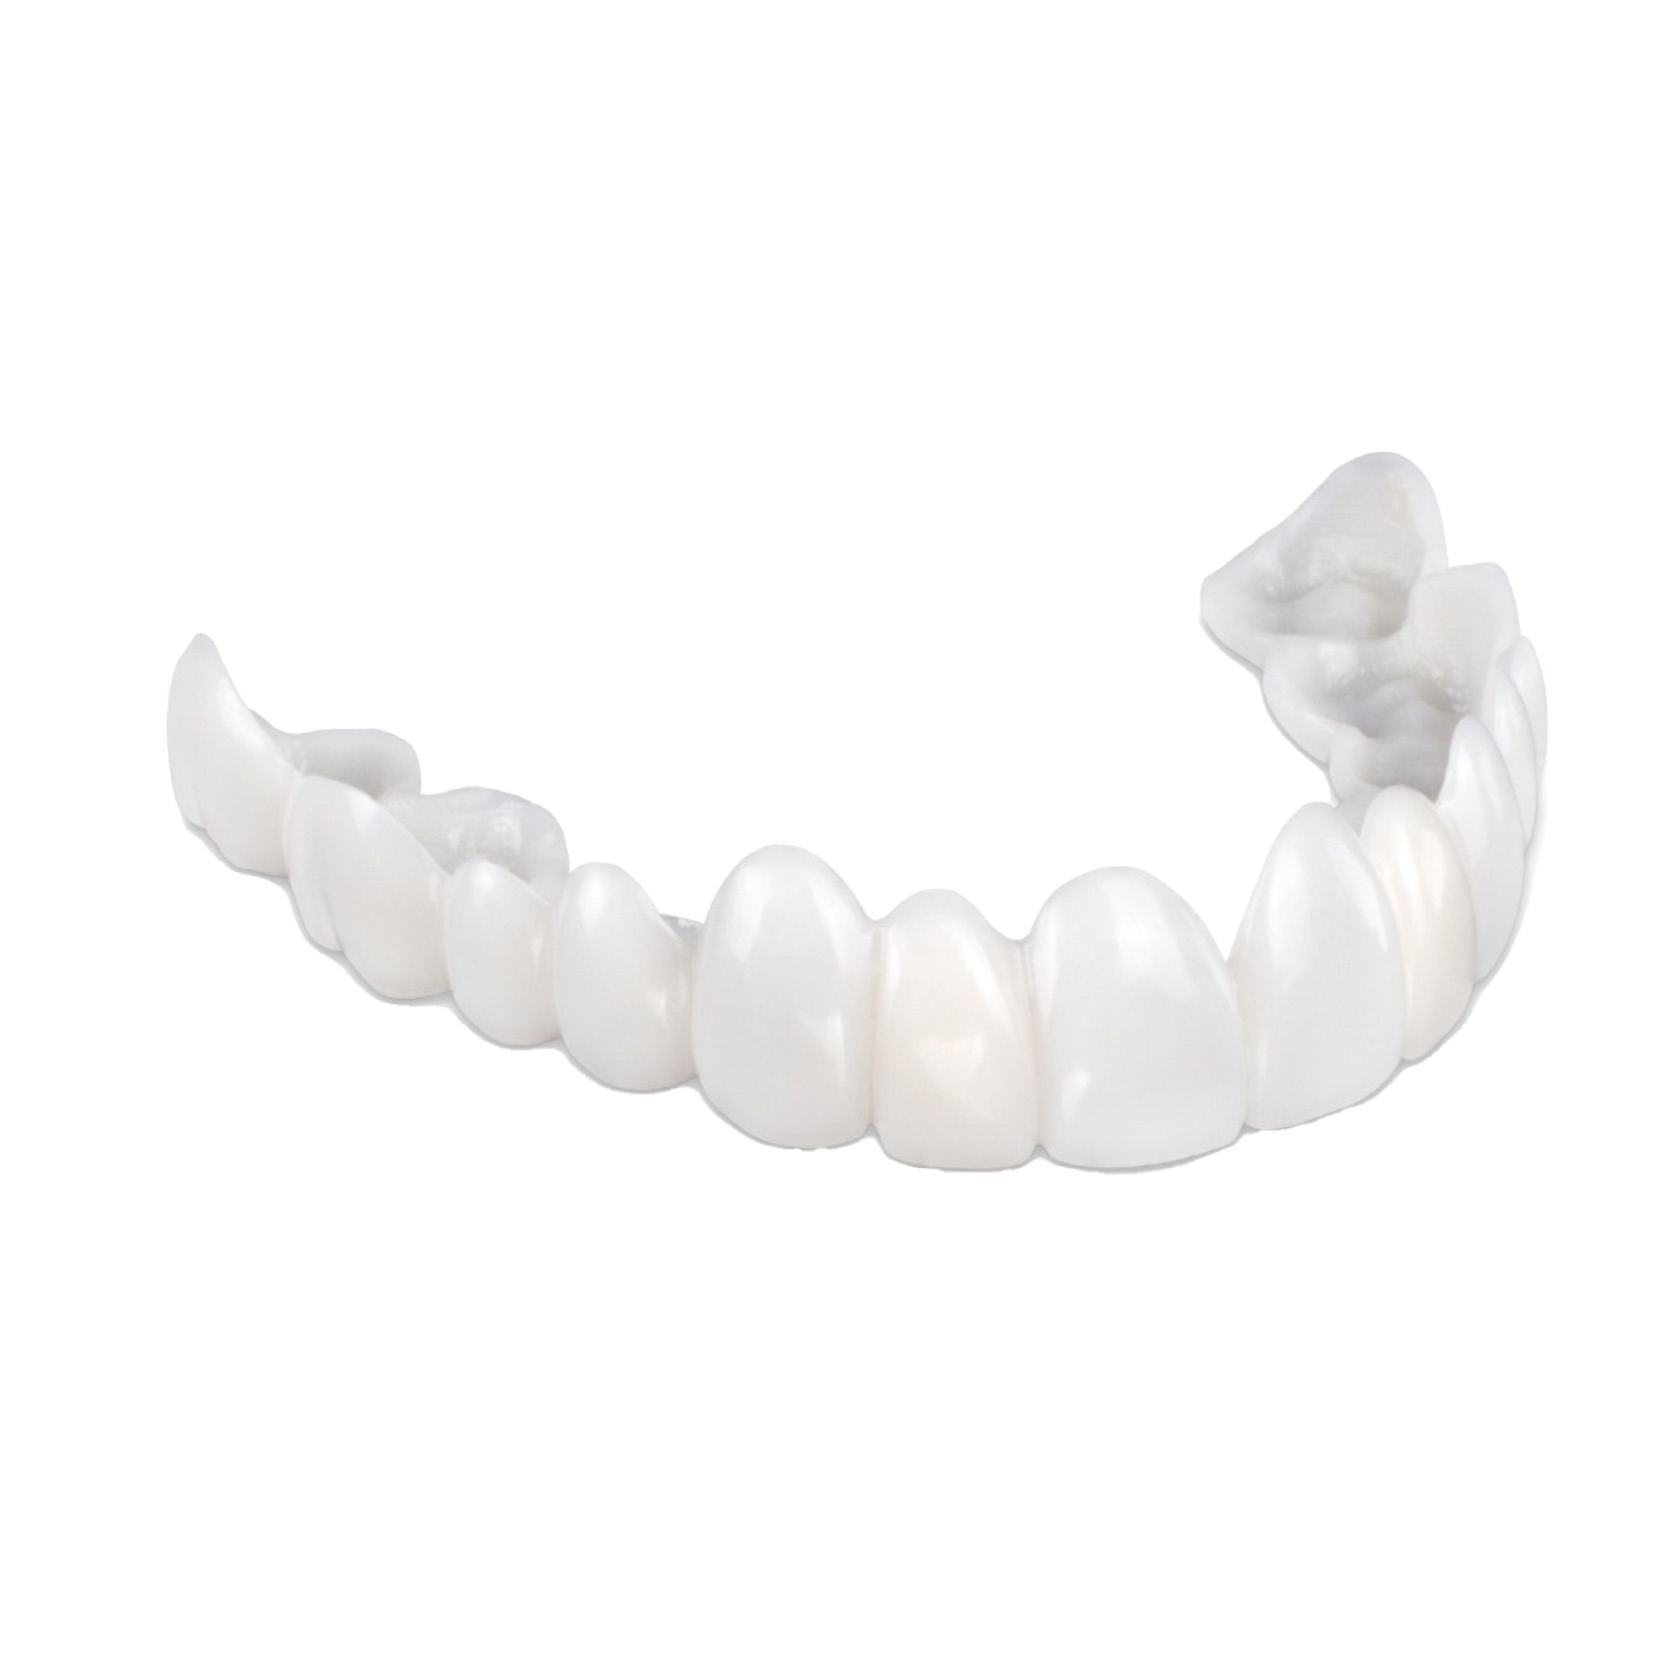 ODM professional teeth whitening trays factory-1